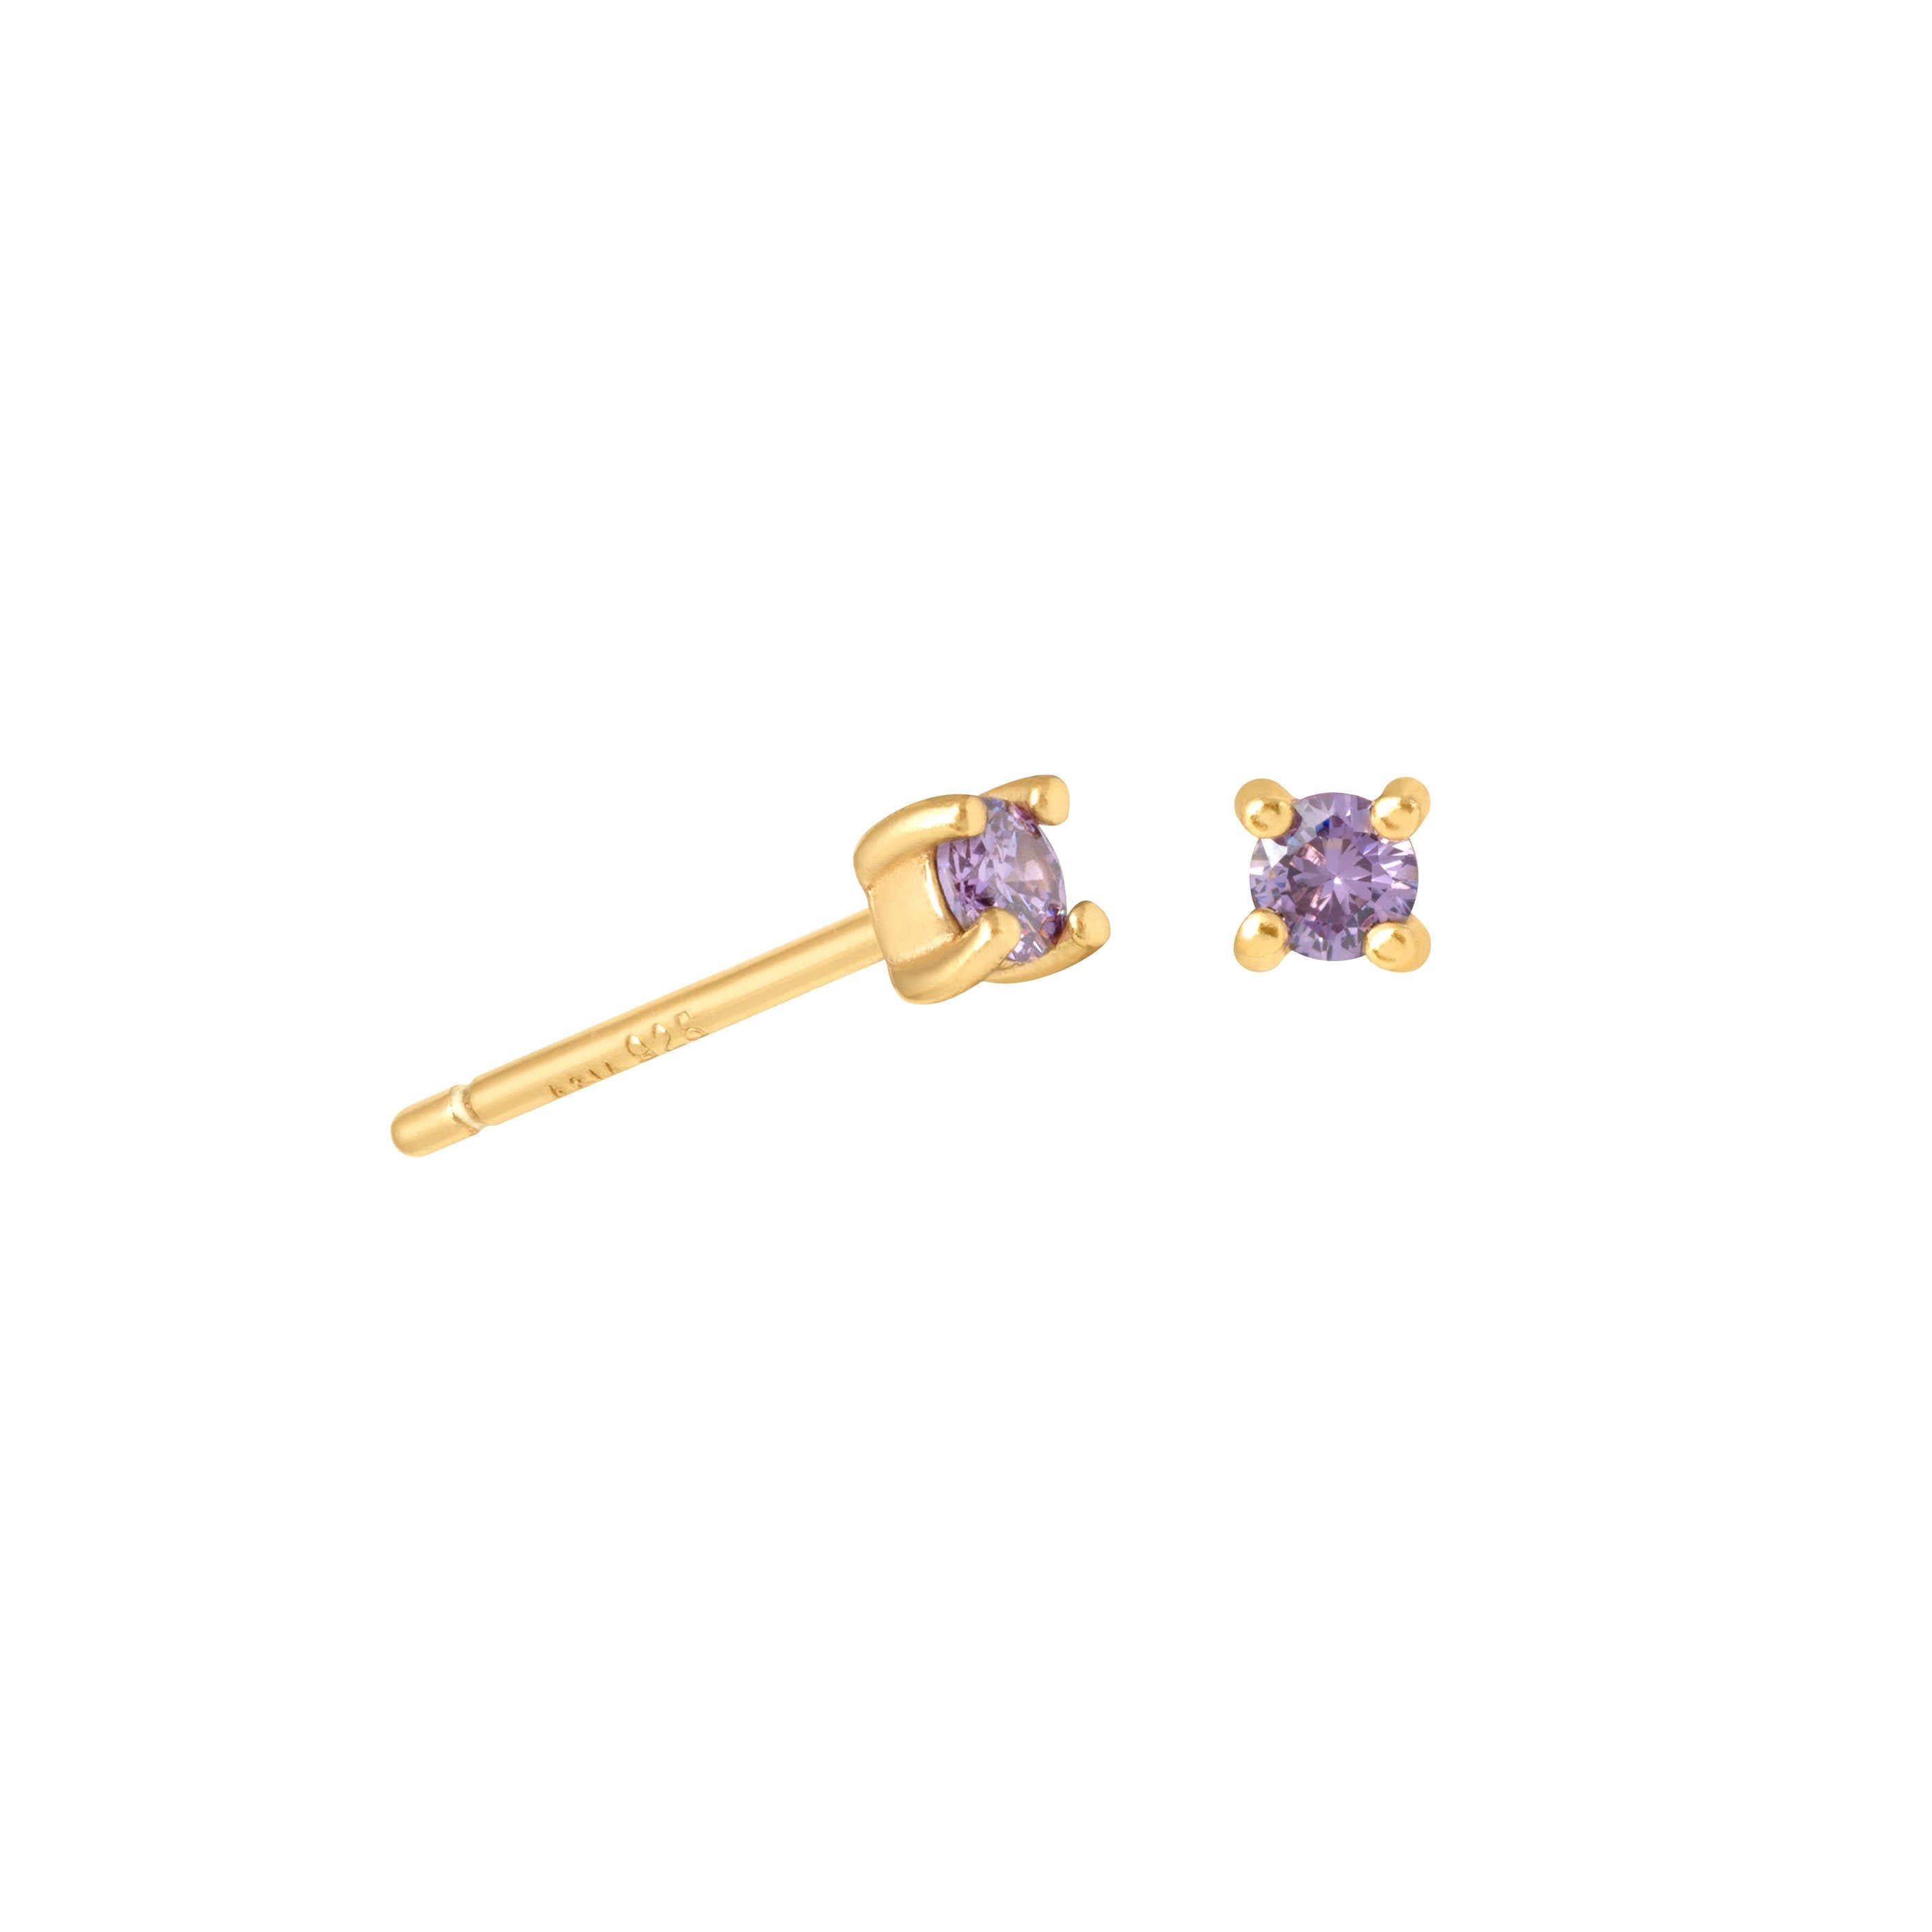 February Birthstone Stud Earrings in Gold with Amethyst CZ